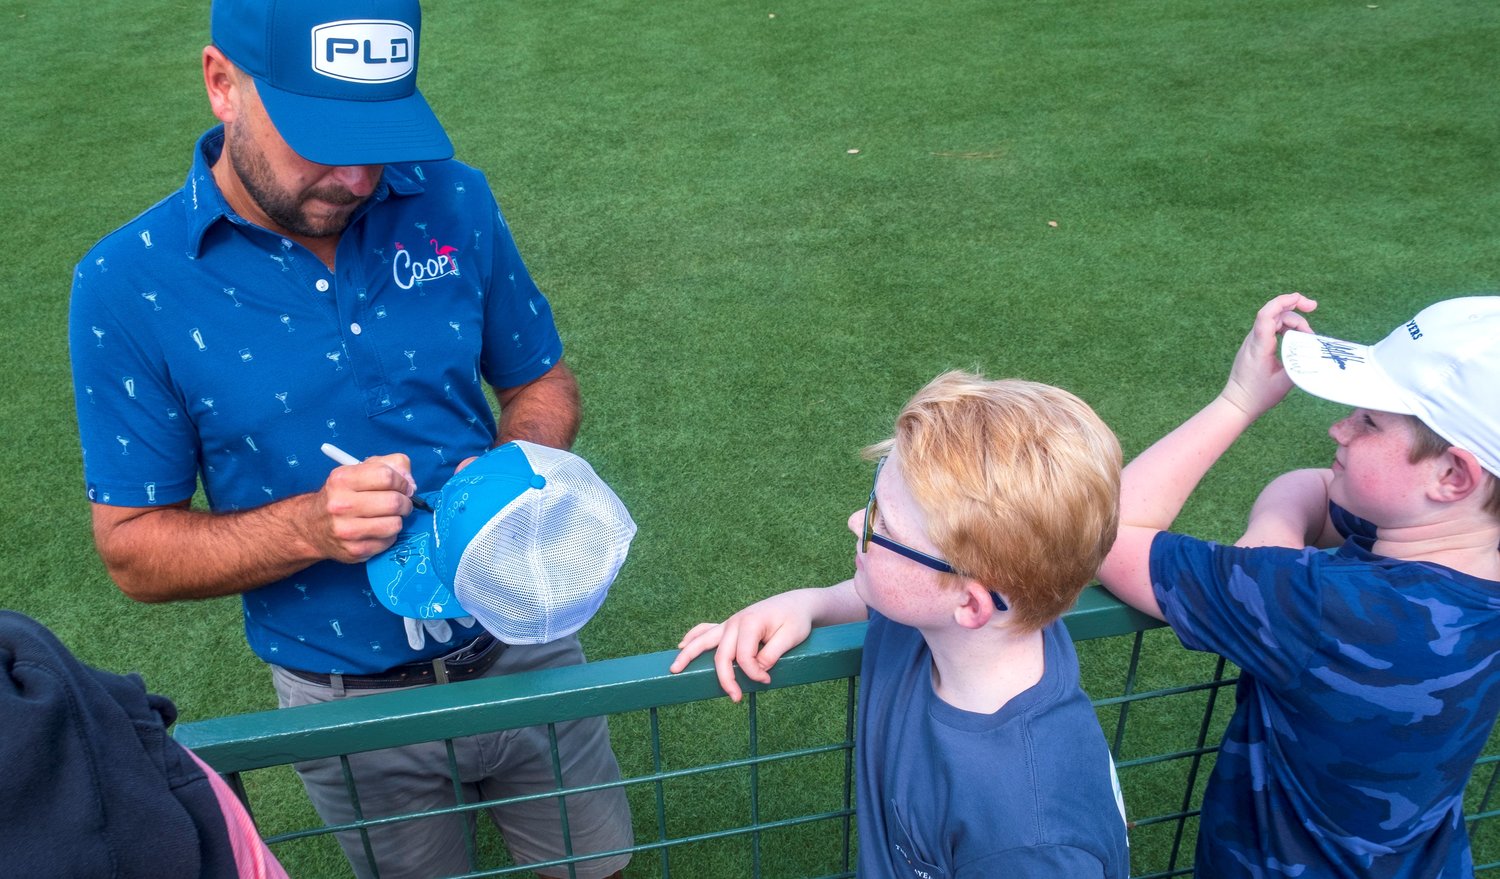 A young fan gets an autograph on Wednesday, March 9, from one of stars of THE PLAYERS Championship.